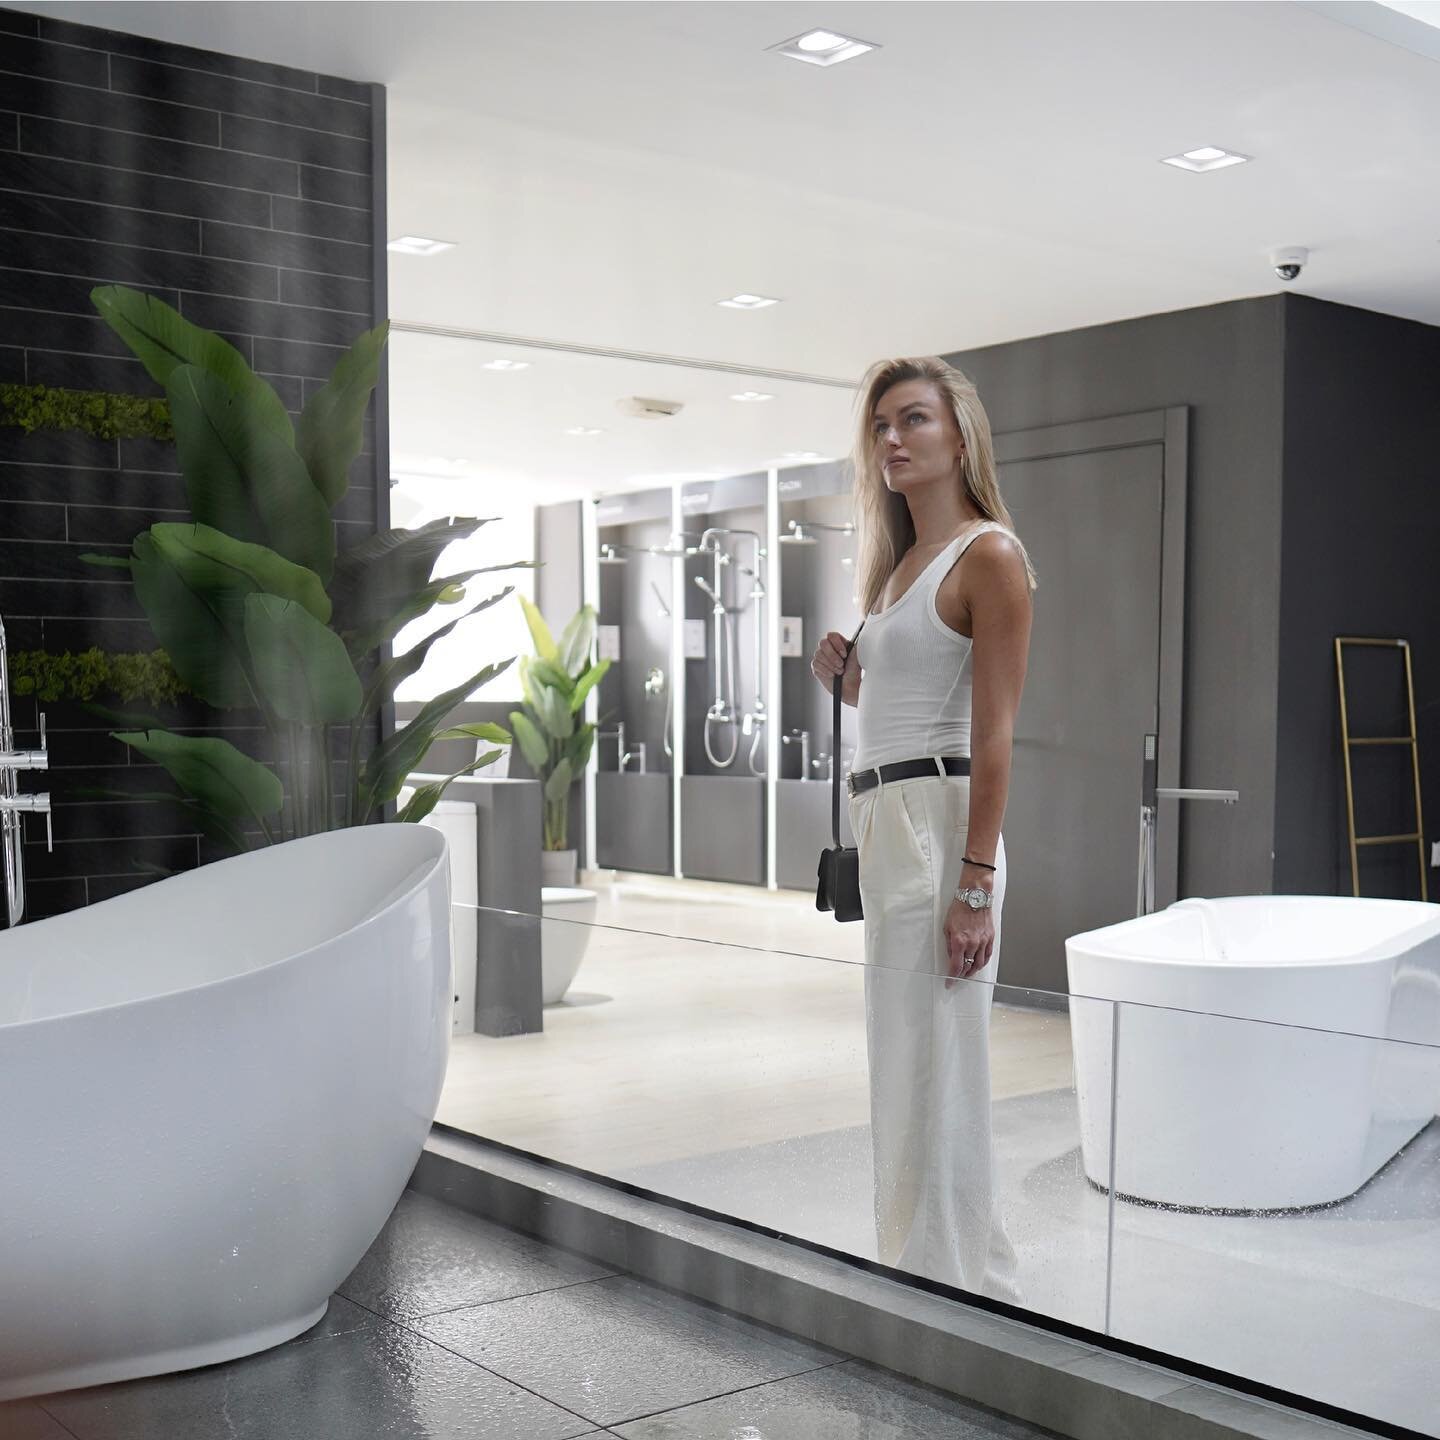 Get ready to immerse yourself in the lap of luxury at Elina Aqua ✨

Indulge in the ultimate pampering experience with our high-quality showers and exquisite selection of sanitary wares.

Visit us:
685 Sheikh Zayed Rd, Dubai, UAE
9am - 8pm
Mondays - S